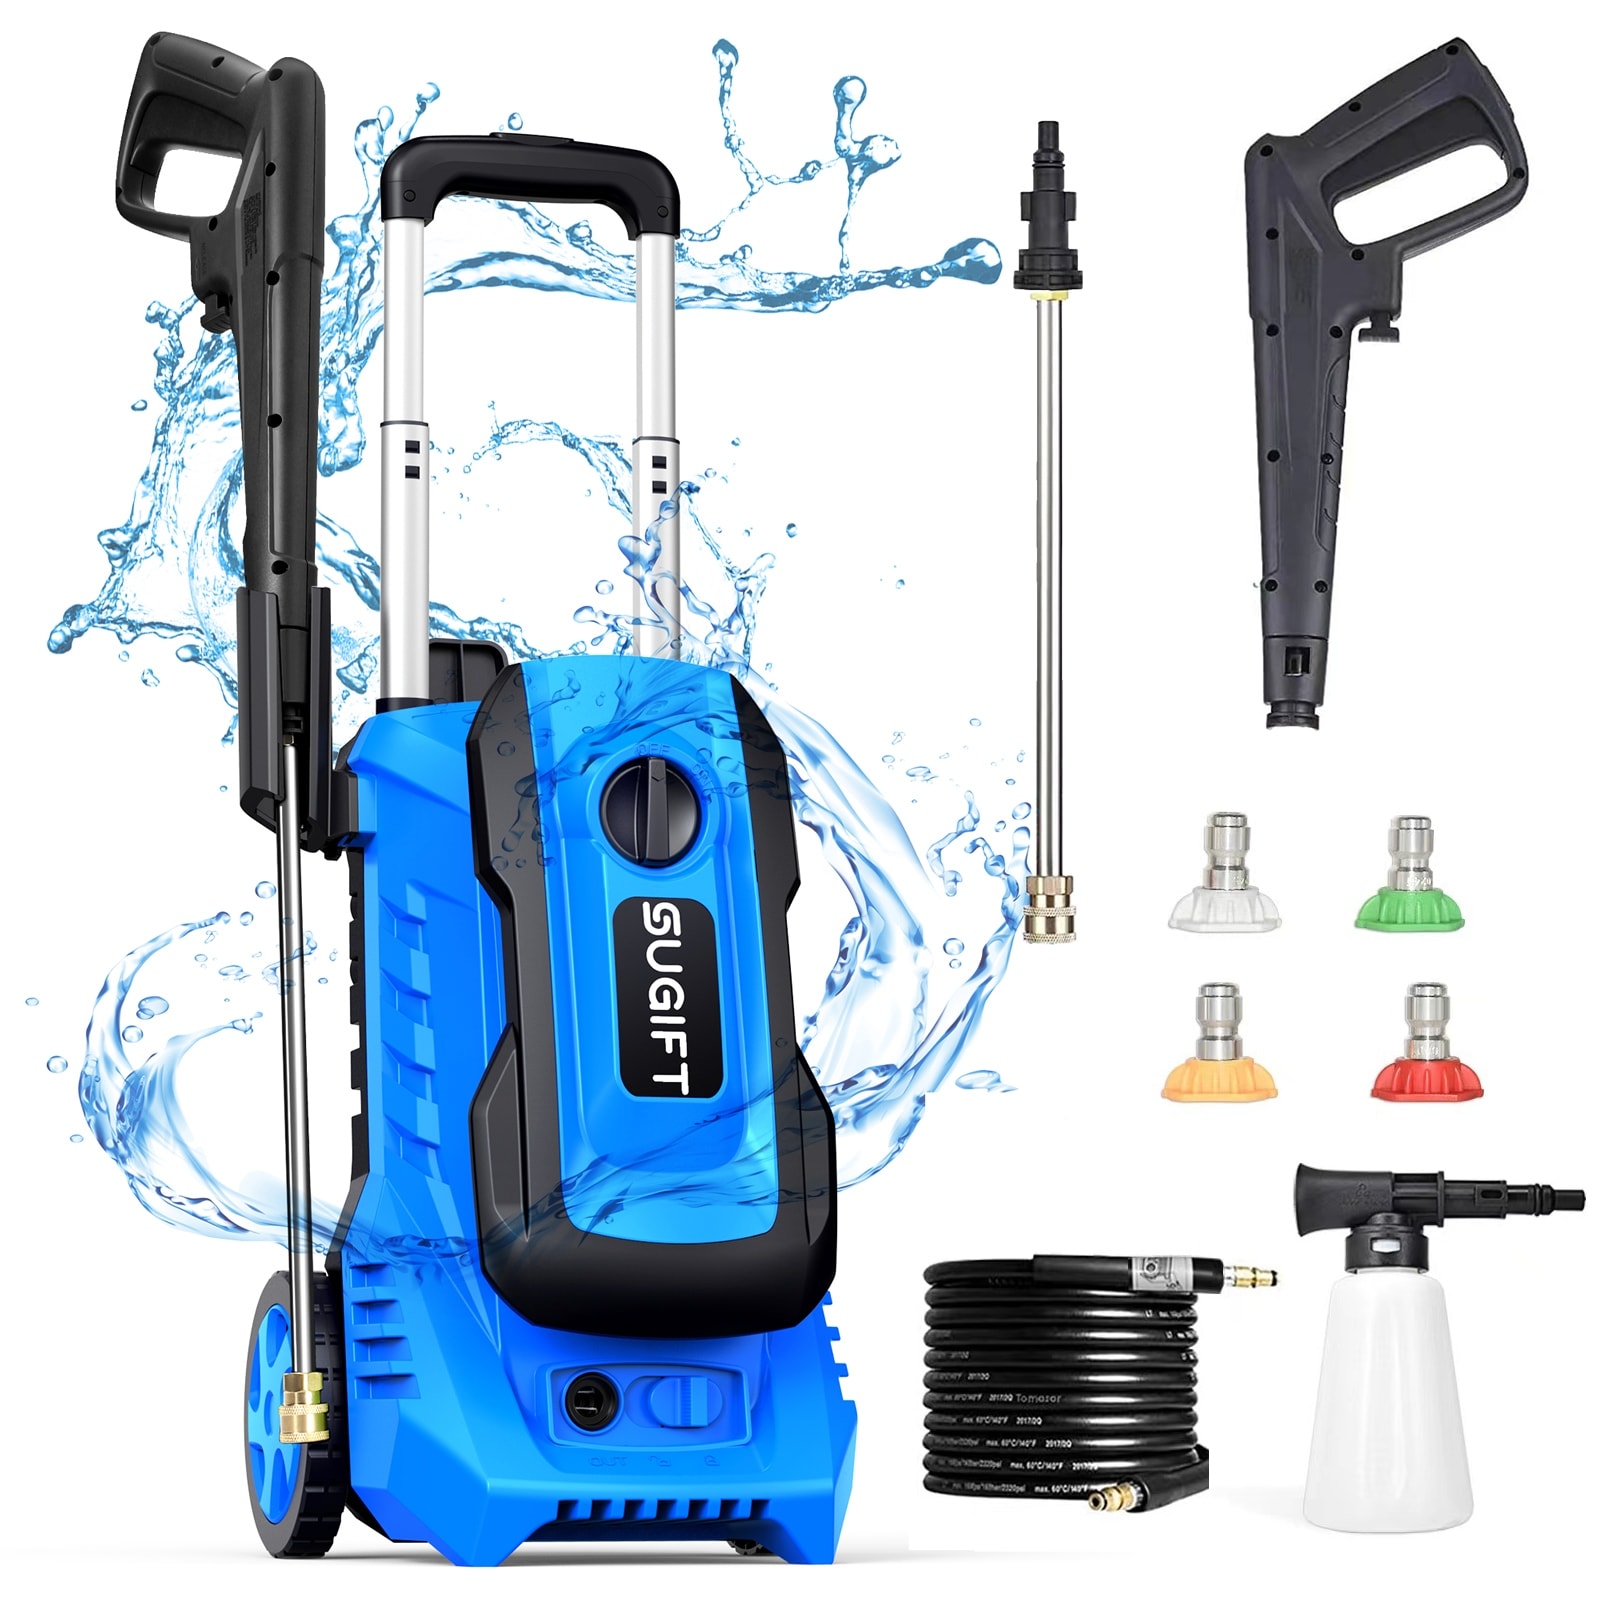 VEVOR Electric Pressure Washer, 2000 psi, Max. 1.76 gpm Power Washer w/ 30  ft Hose & Reel, 5 Quick Connect Nozzles, Foam Cannon, Portable to Clean  Patios, Cars, Fences, Driveways, ETL Listed 